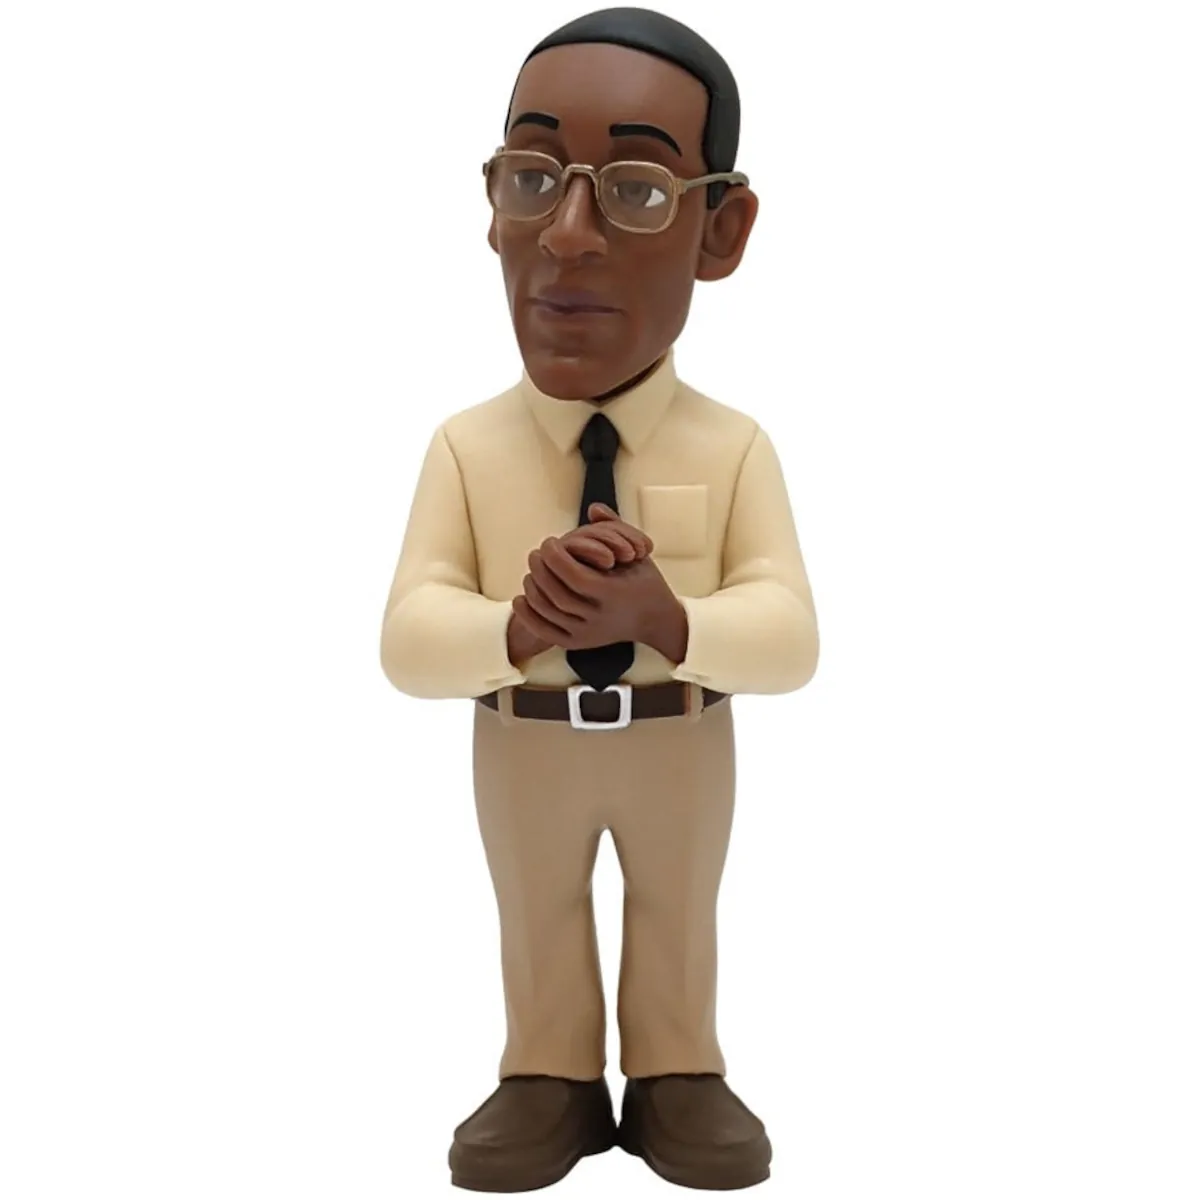 MN13371 Gus Fring (Breaking Bad) 12cm MINIX Collectable Figure